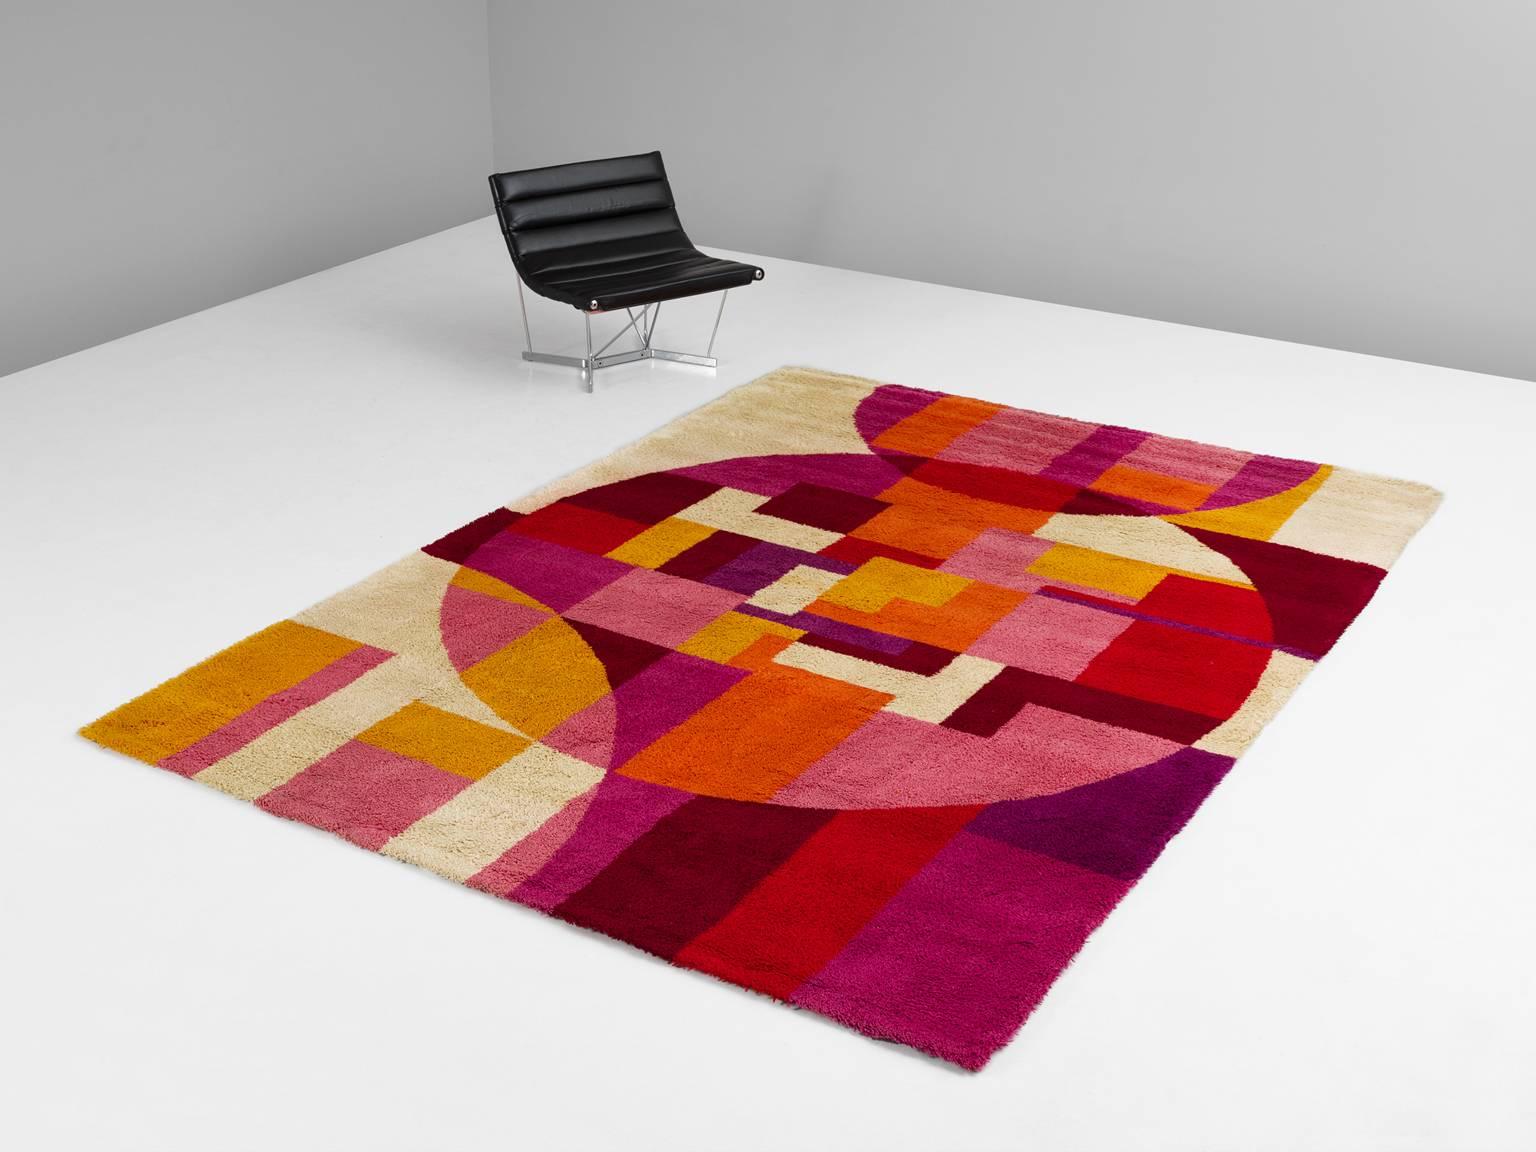 Carpet, in wool, Europe, 1970s.

Graphical and colorful rug from the 1970s. This tufted rug shows a nice combination of geometrical shapes and bright colors. Several shades of pink, red, yellow and orange are combined with an off-white back